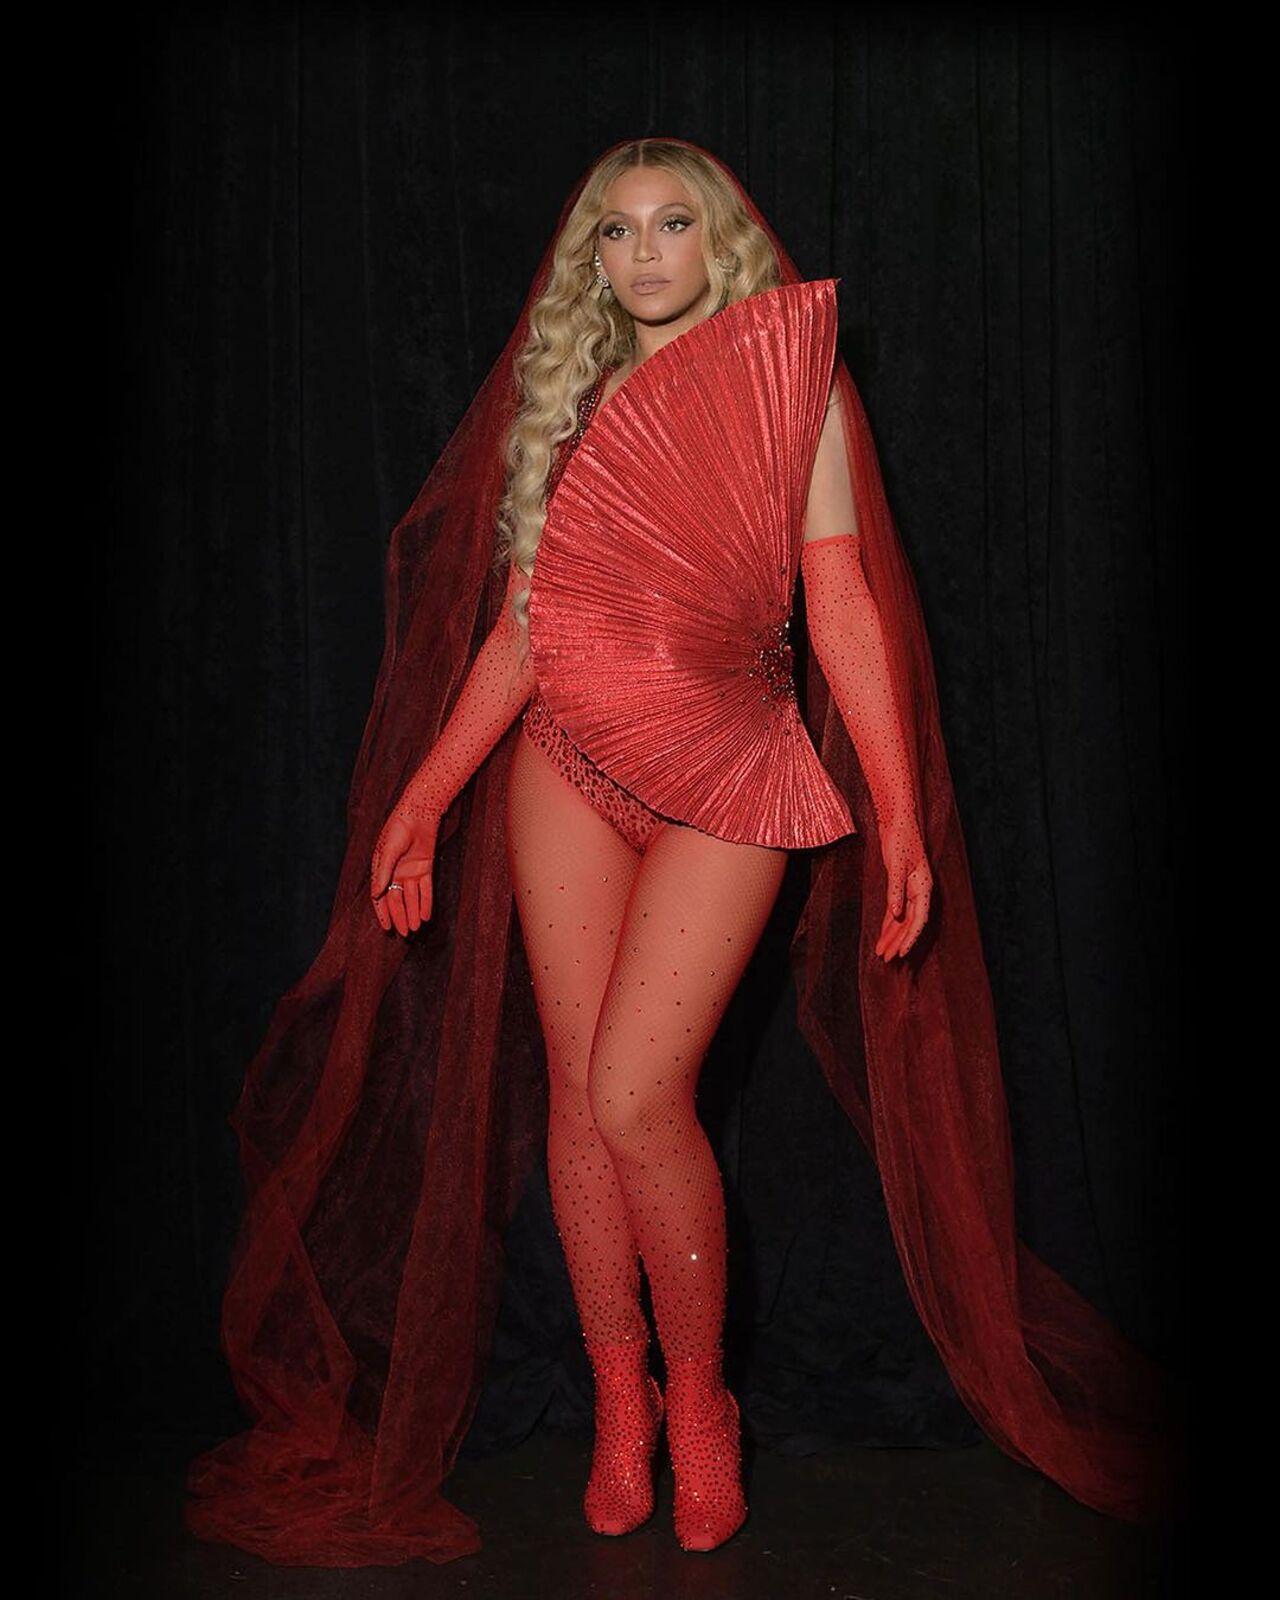 Beyonce's Rennaisance World Tour started in Stockholm – with a mighty 57 stadium dates around the world to follow – before heading on to Brussels, London, Barcelona, Marseille and Amsterdam. She is definitely making a style statement with this flowing red lacy dress - complete with a cape and gigantic fan pinned to the outfit